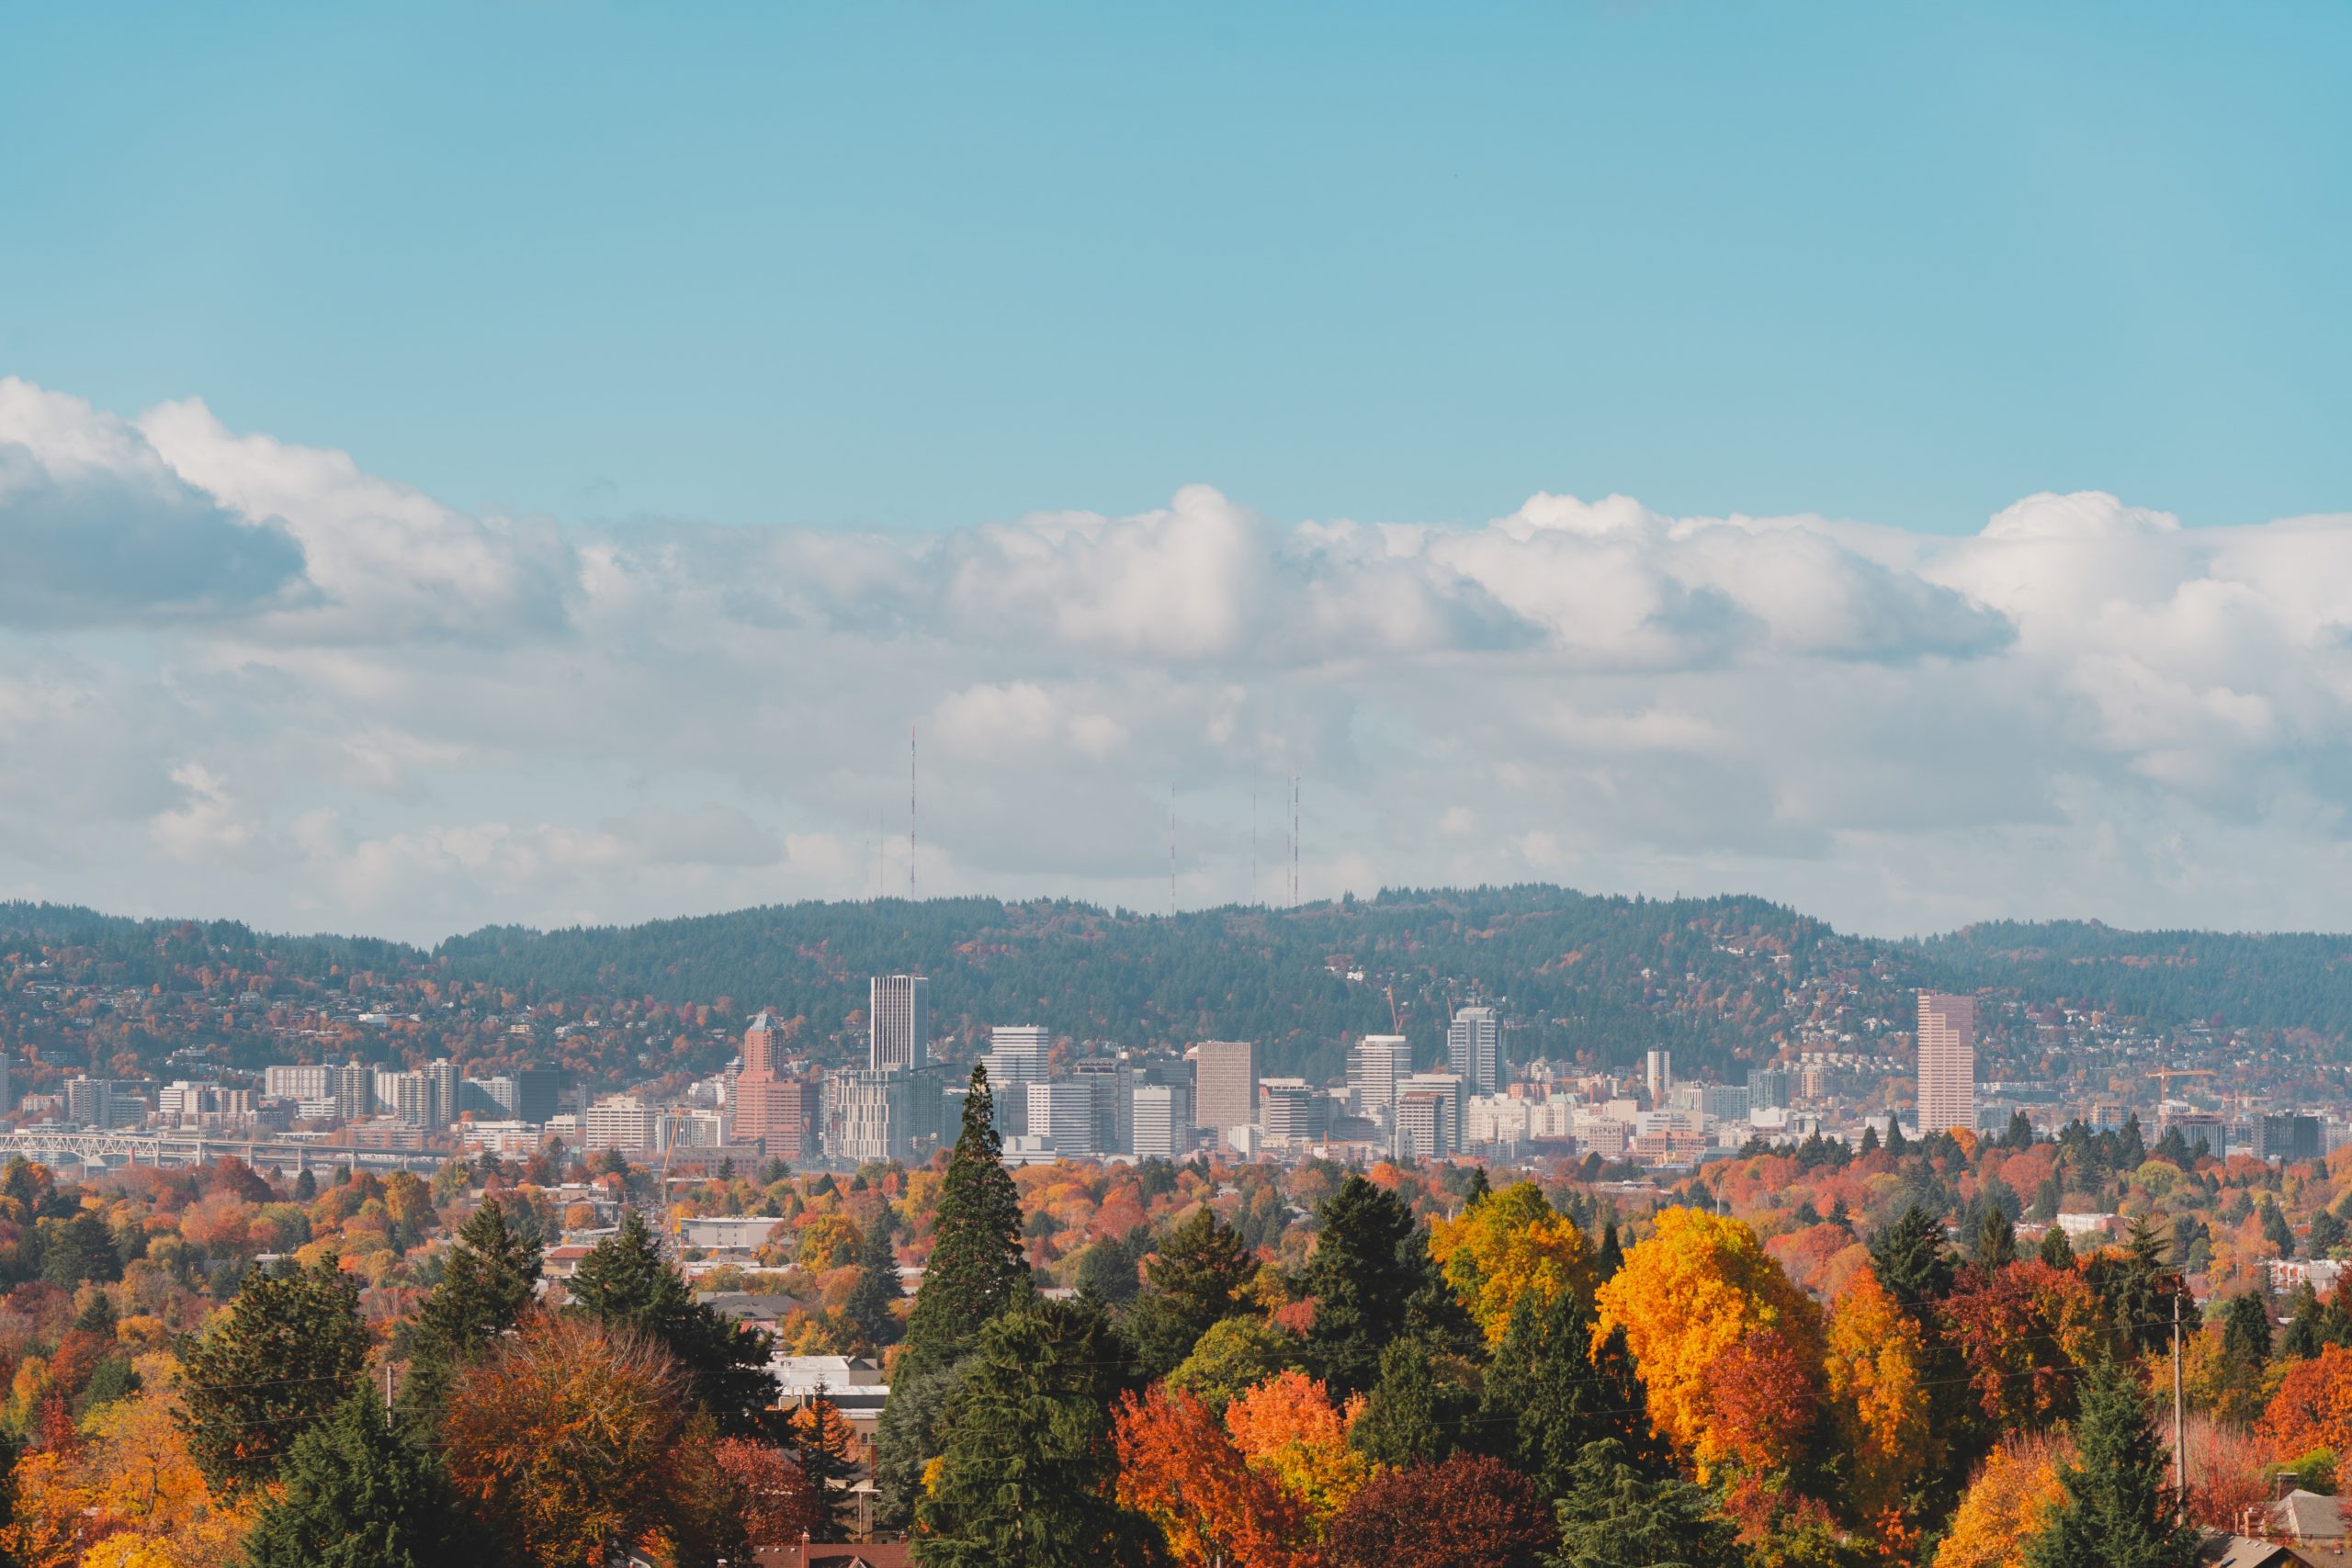 Portland from a distance